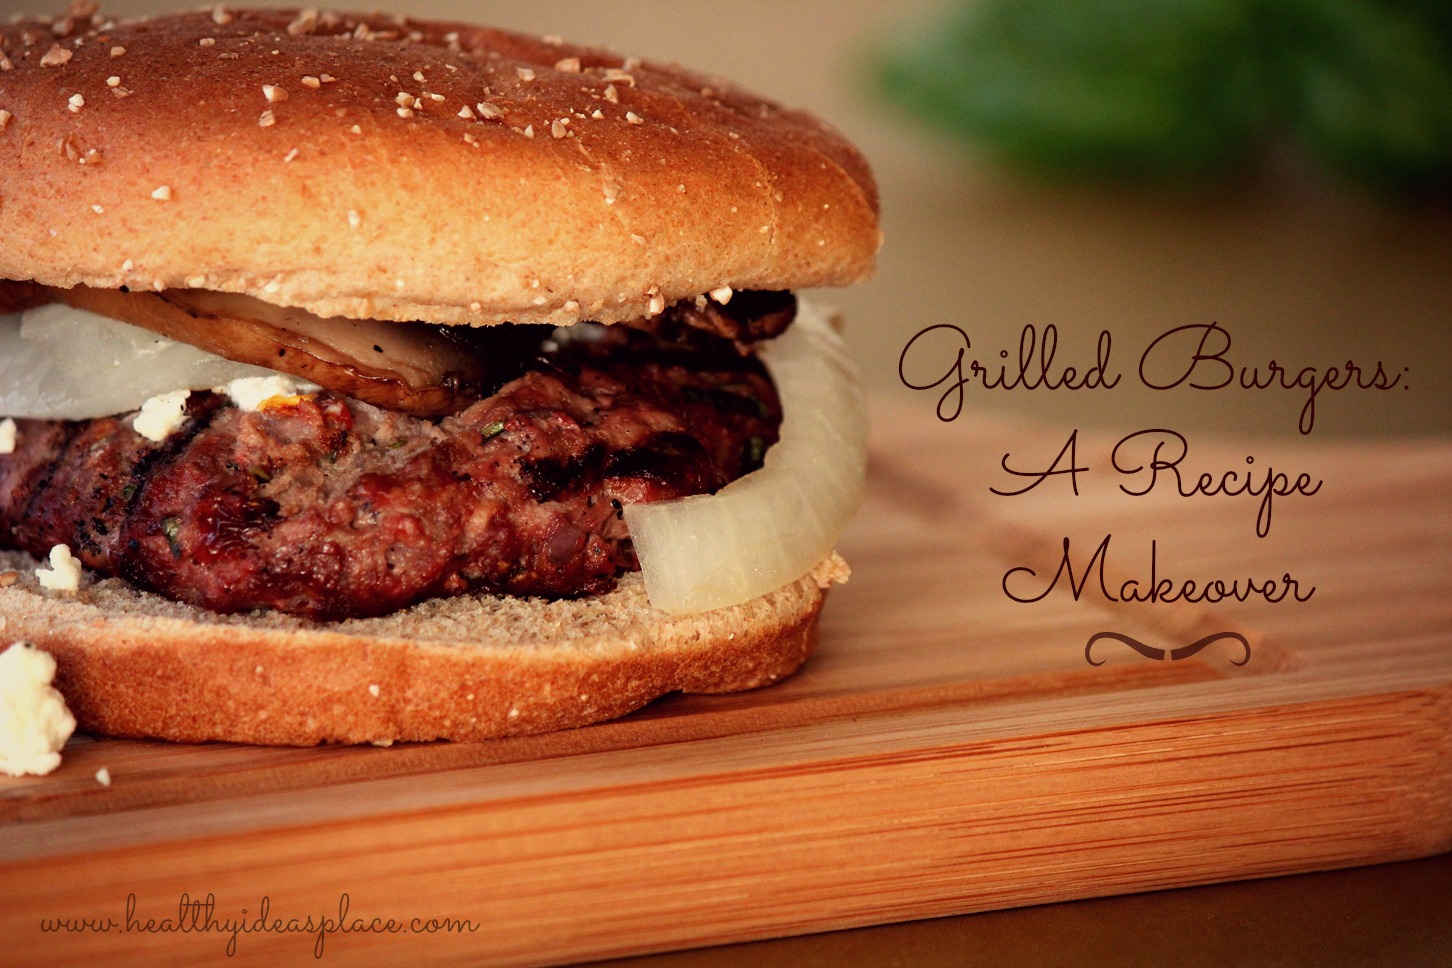 Grilled Burgers with Basil and Sun-dried Tomatoes: A Recipe Makeover